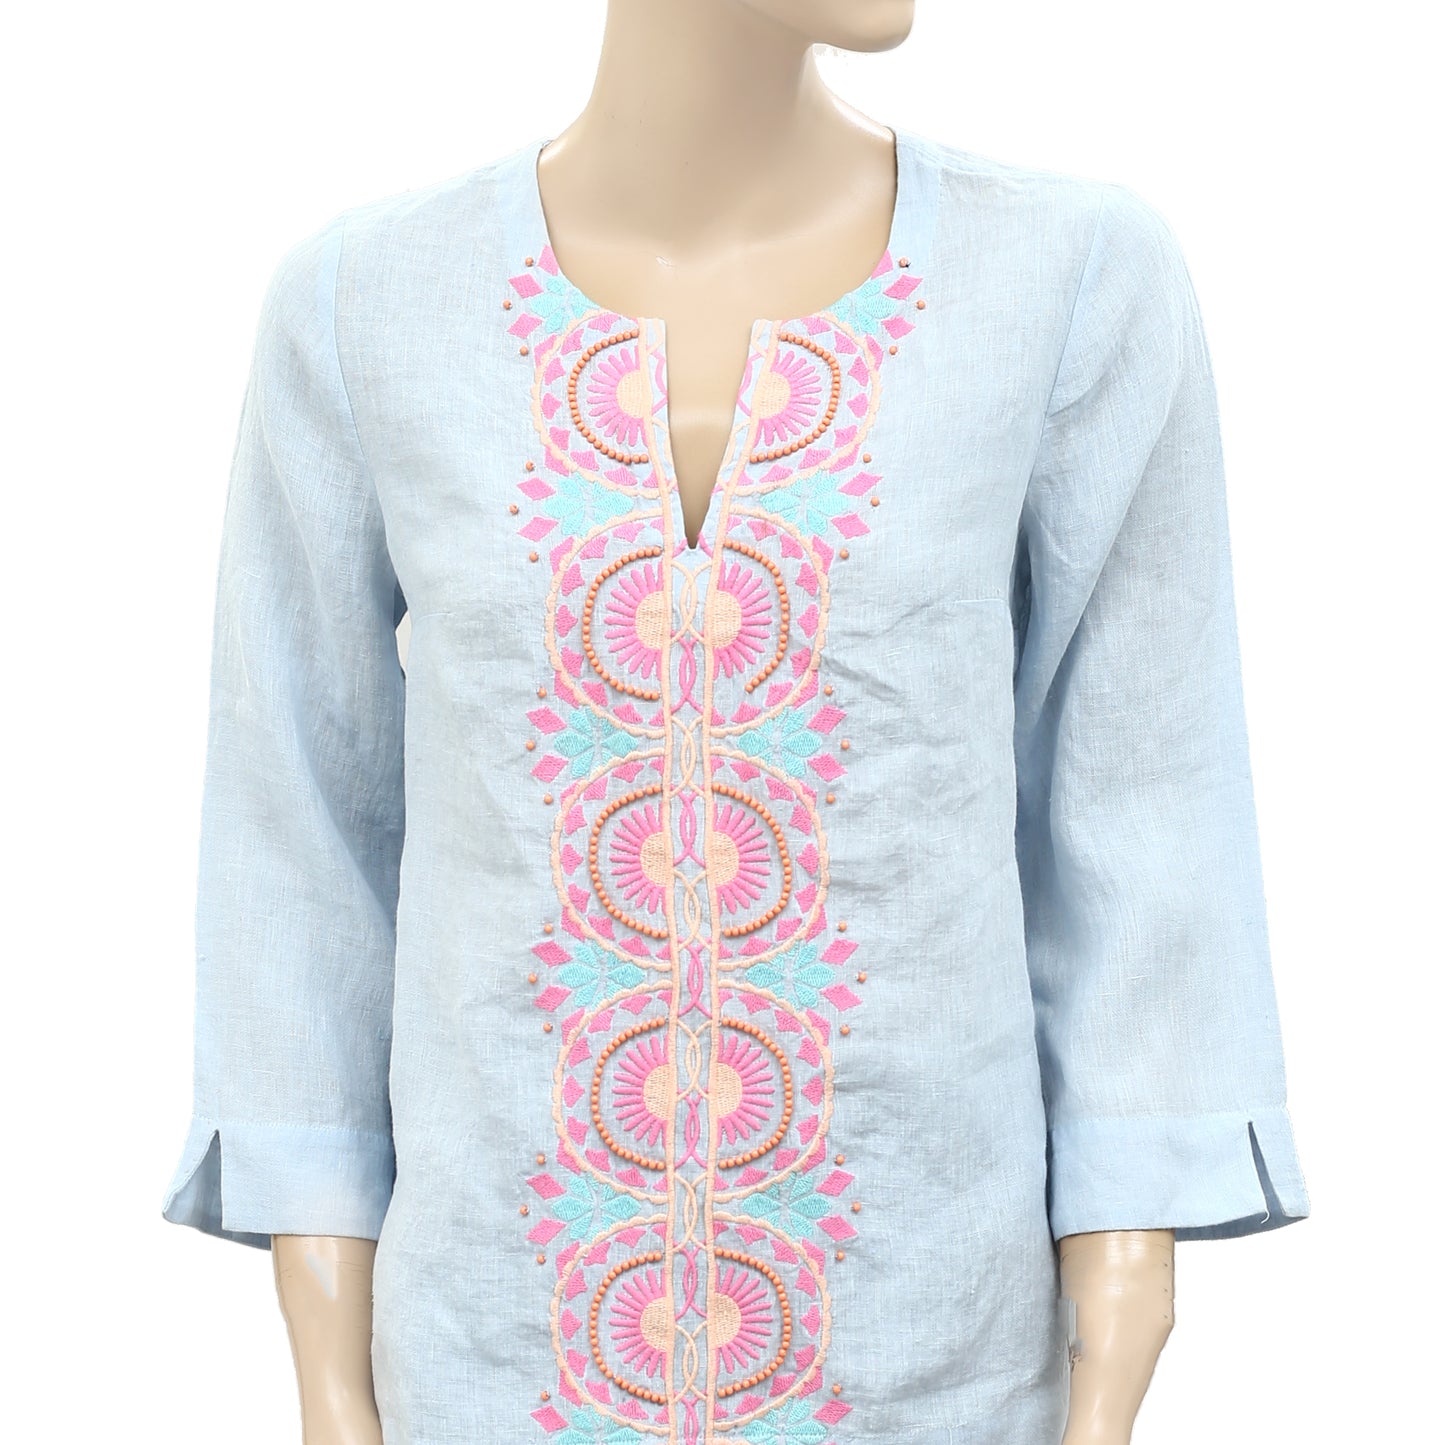 Lilly Pulitzer Beaded Embellished Embroidered Resort Tunic Top